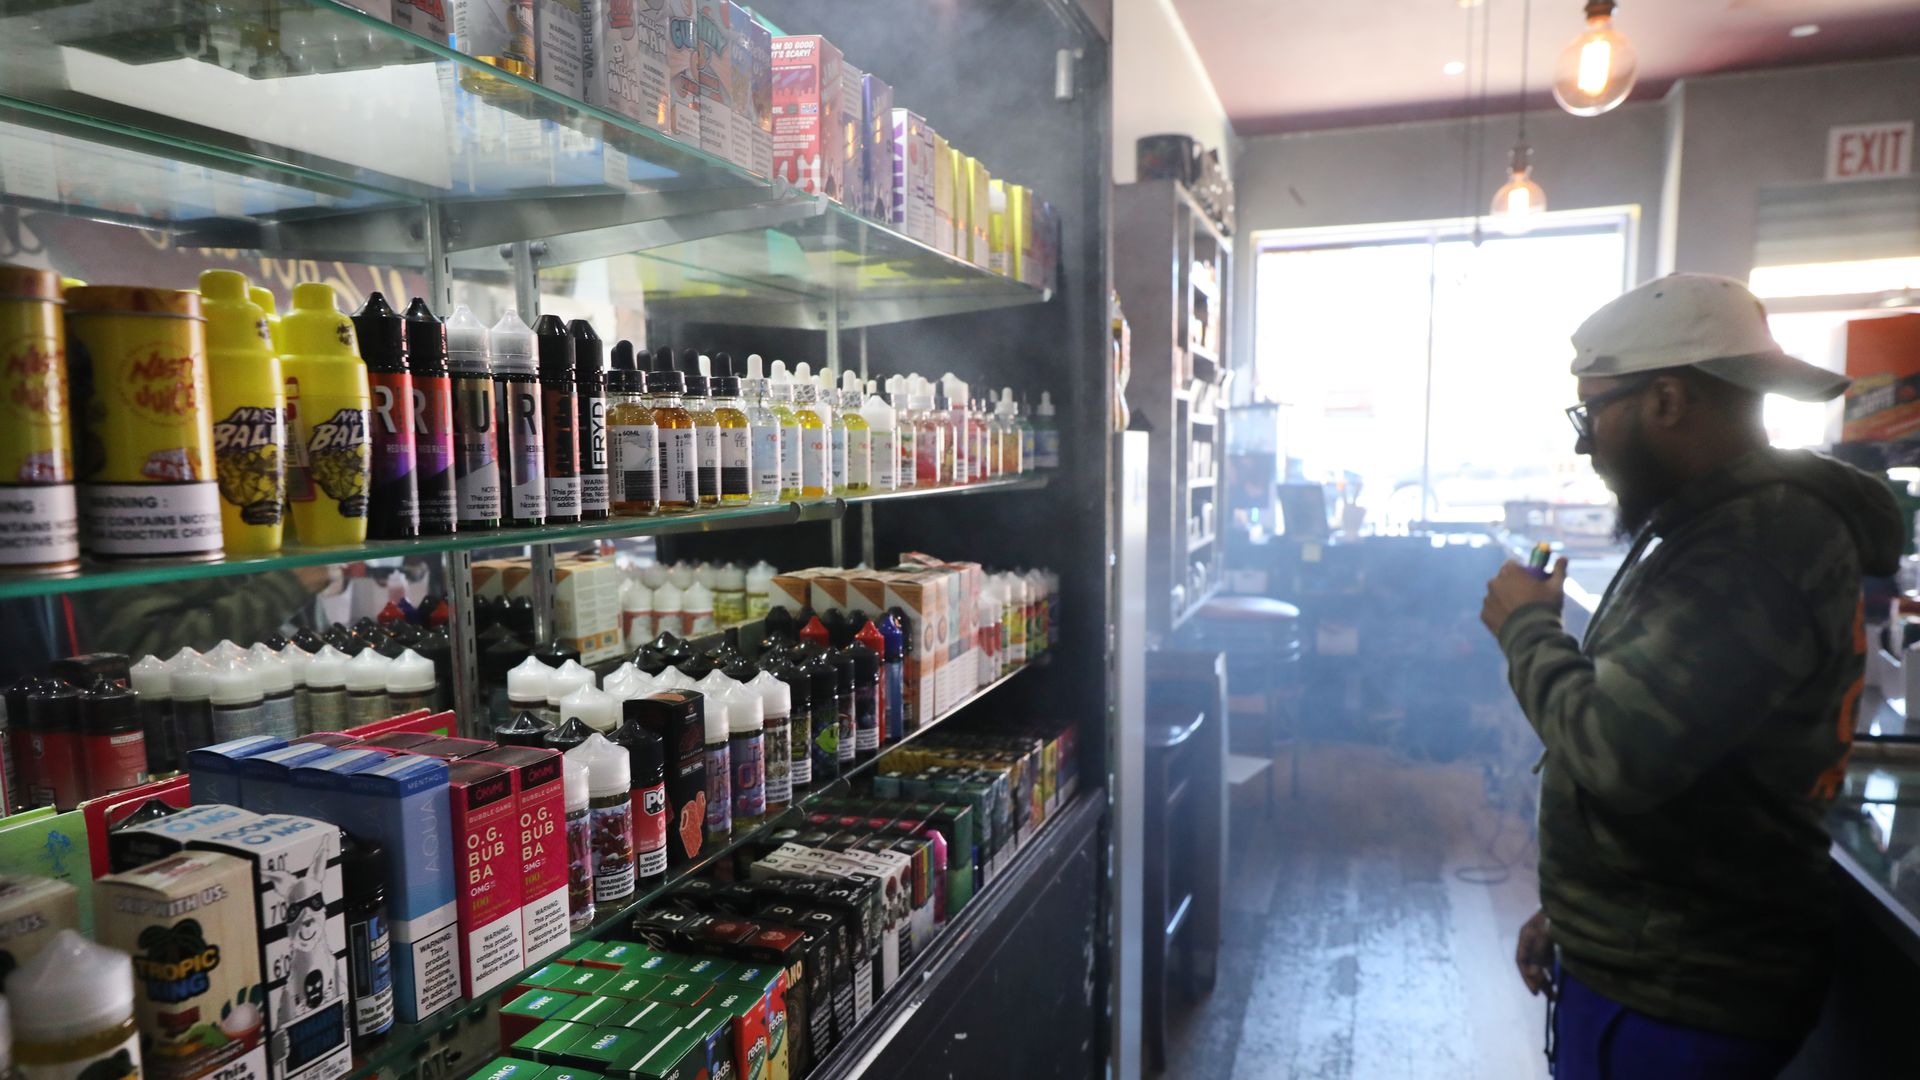 Vaping products, including flavored vape liquids and pods, are displayed at Gotham Vape in Queens, on September 17, 2019 in New York City.